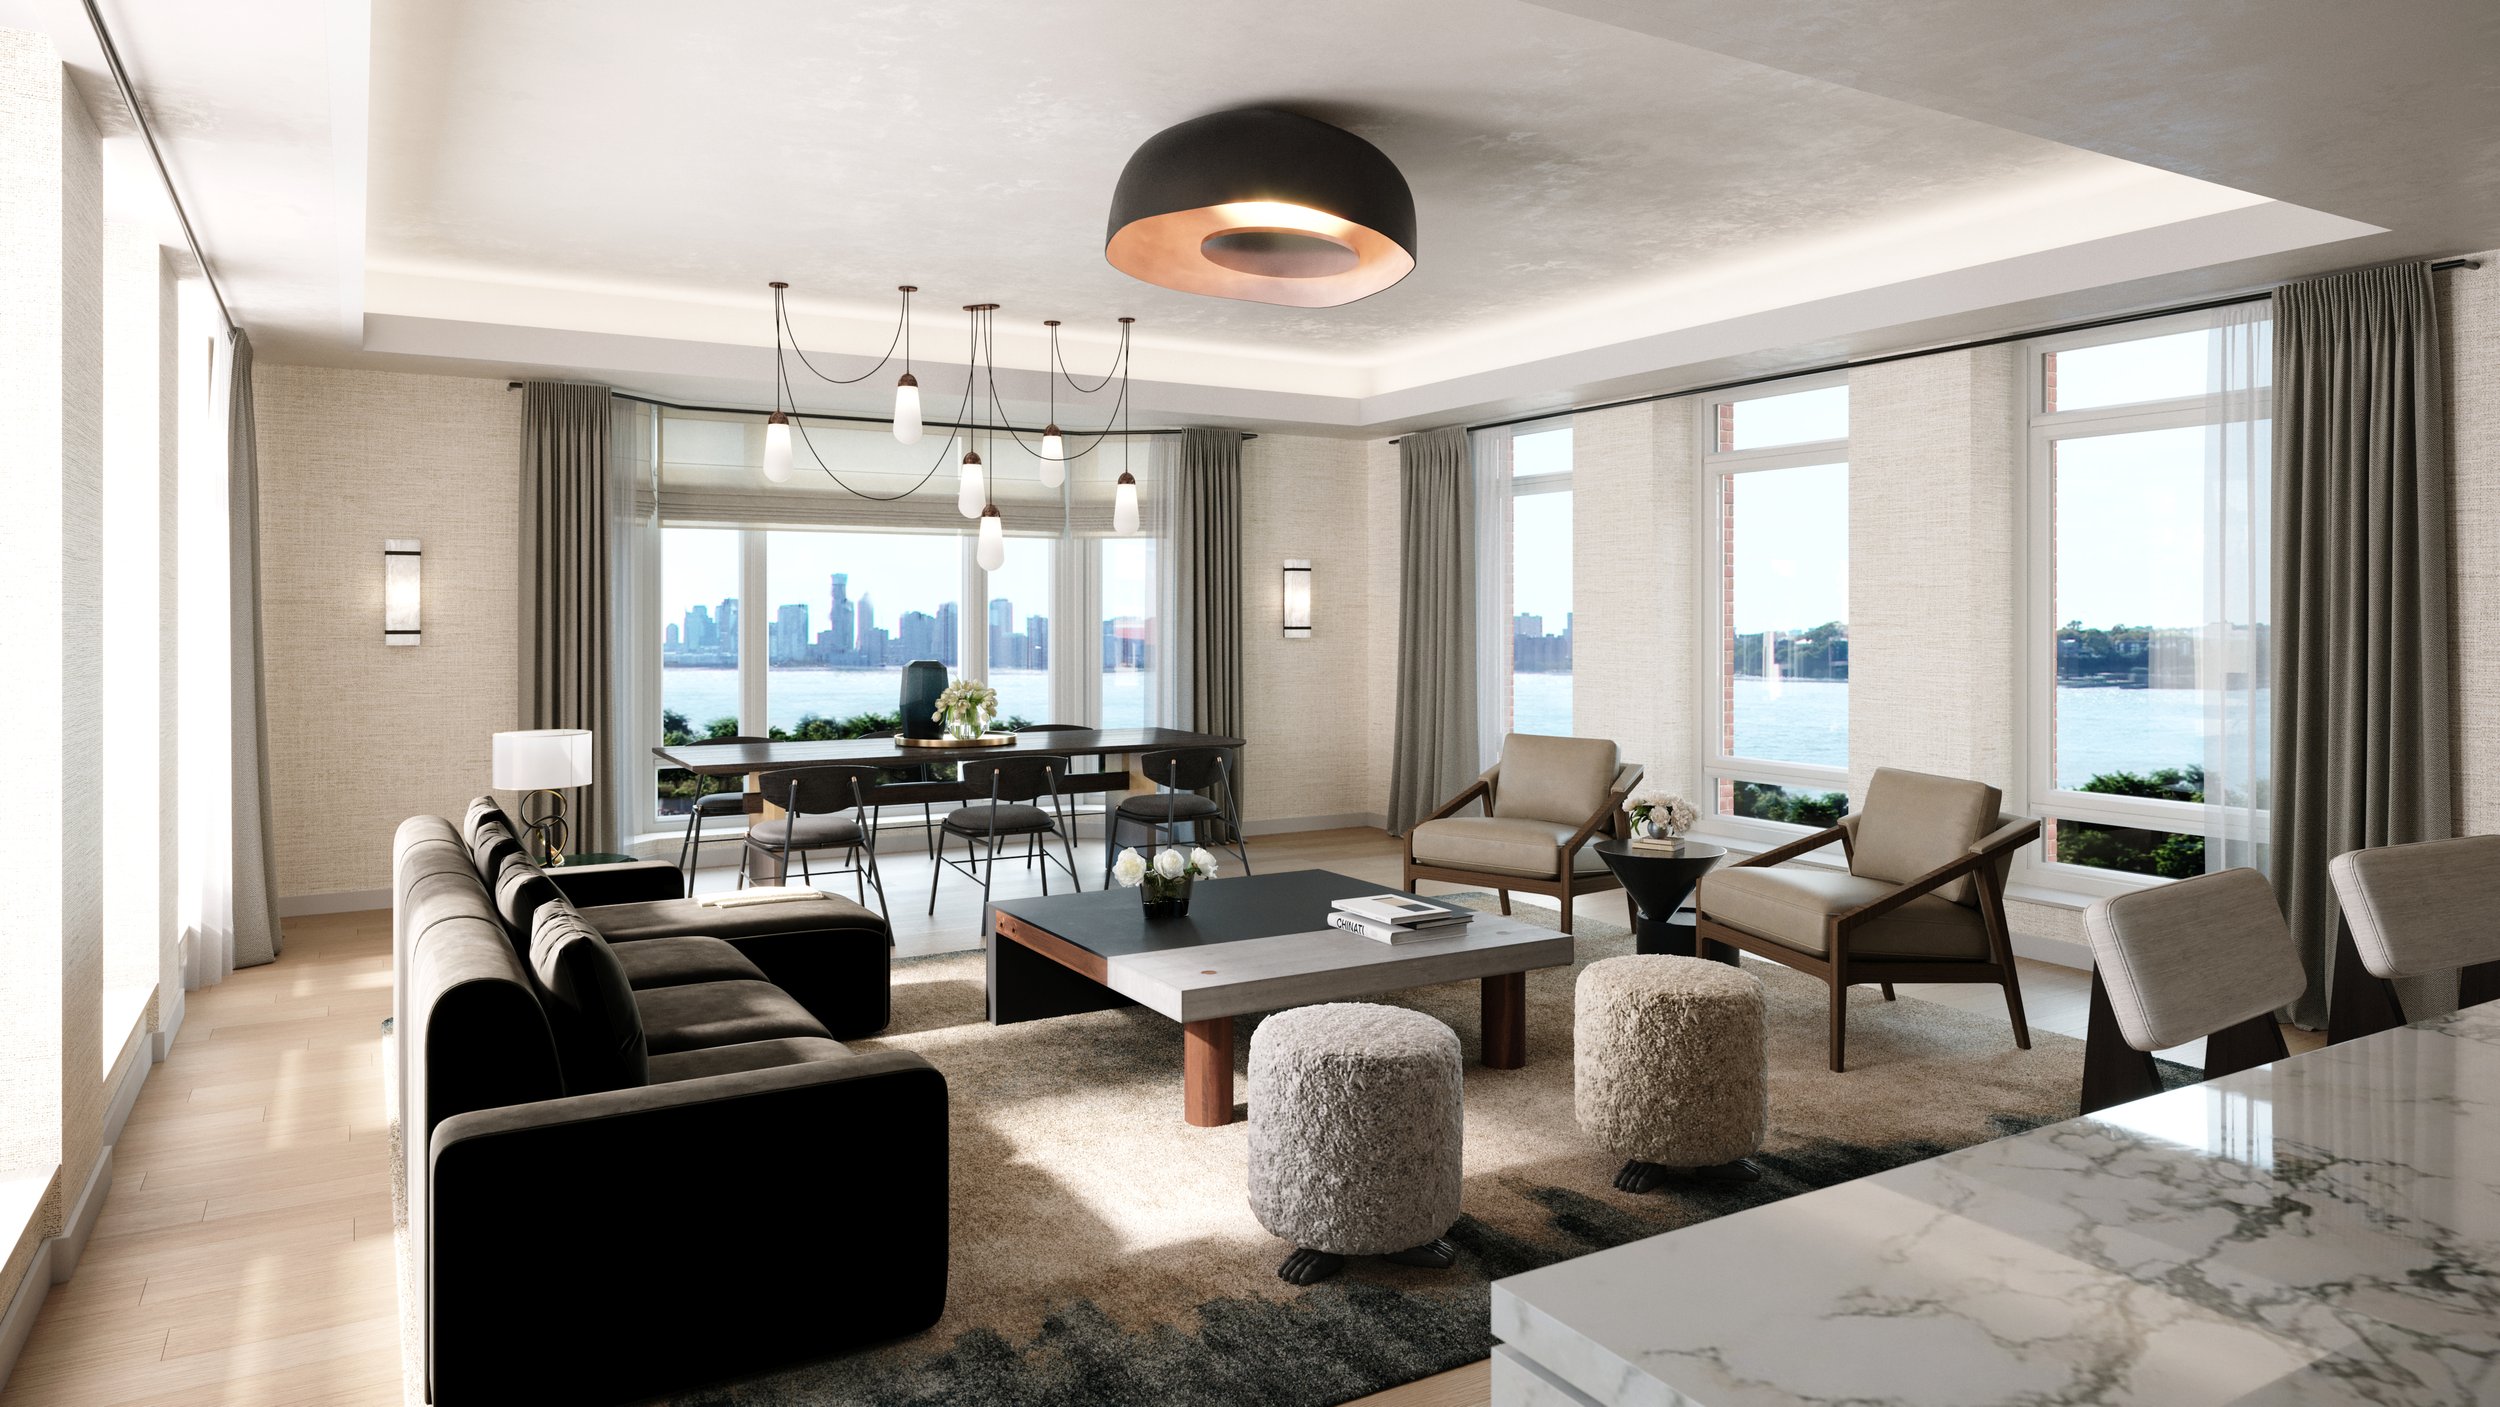  Located in one of New York City’s most in-demand neighborhoods, The Cortland reflects everything West Chelsea is beloved for: a world-famous art scene, culinary destinations, retail, diverse lifestyle attractions, and striking contemporary architect